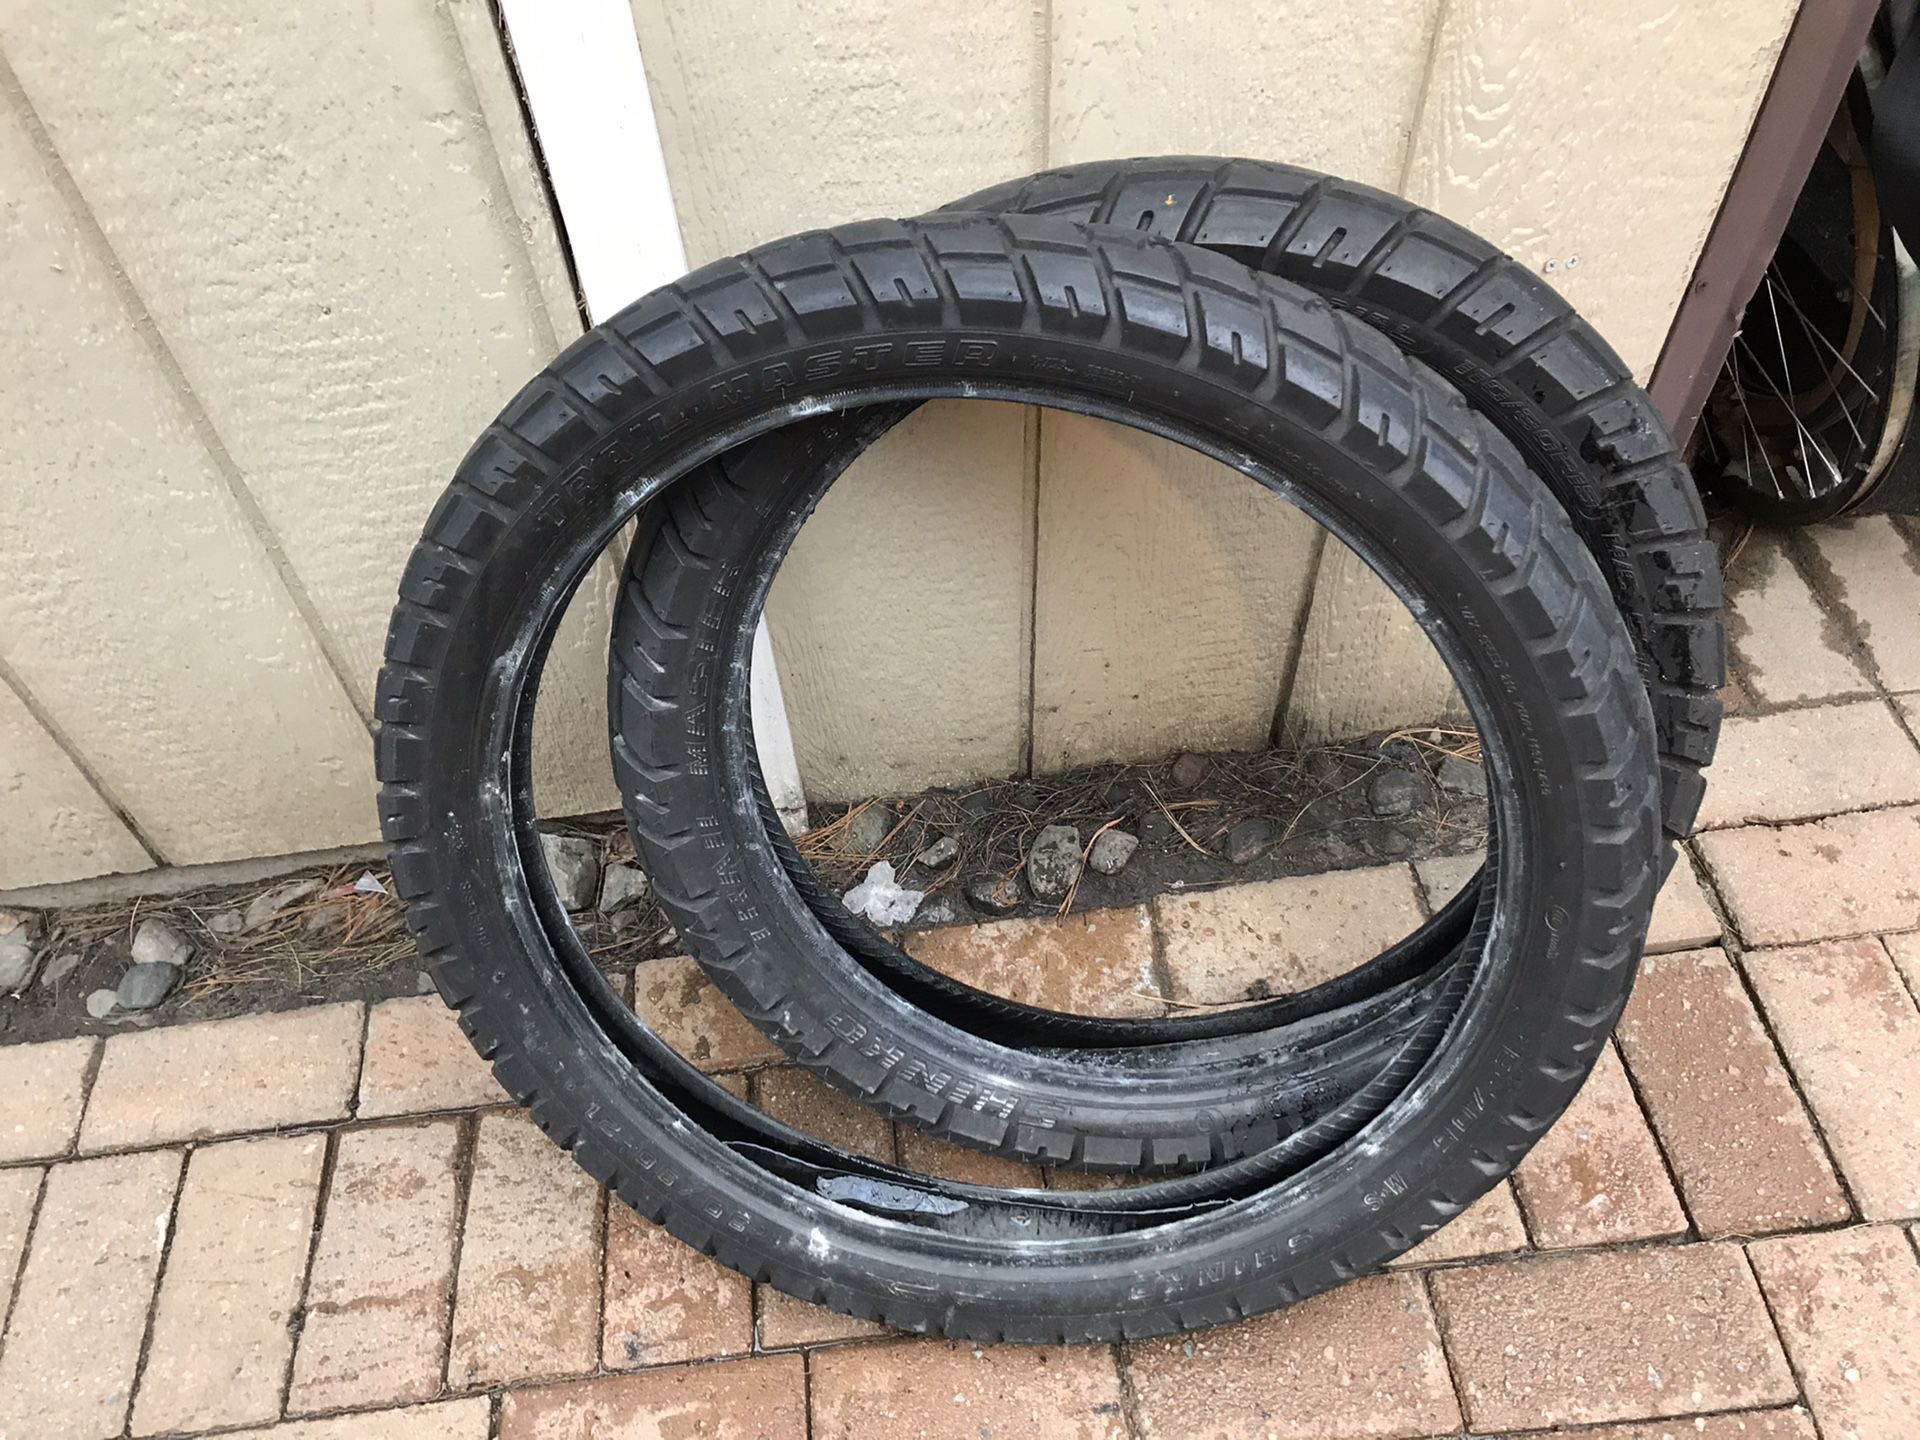 Street tires for any dirt bike 21 front and 19 back